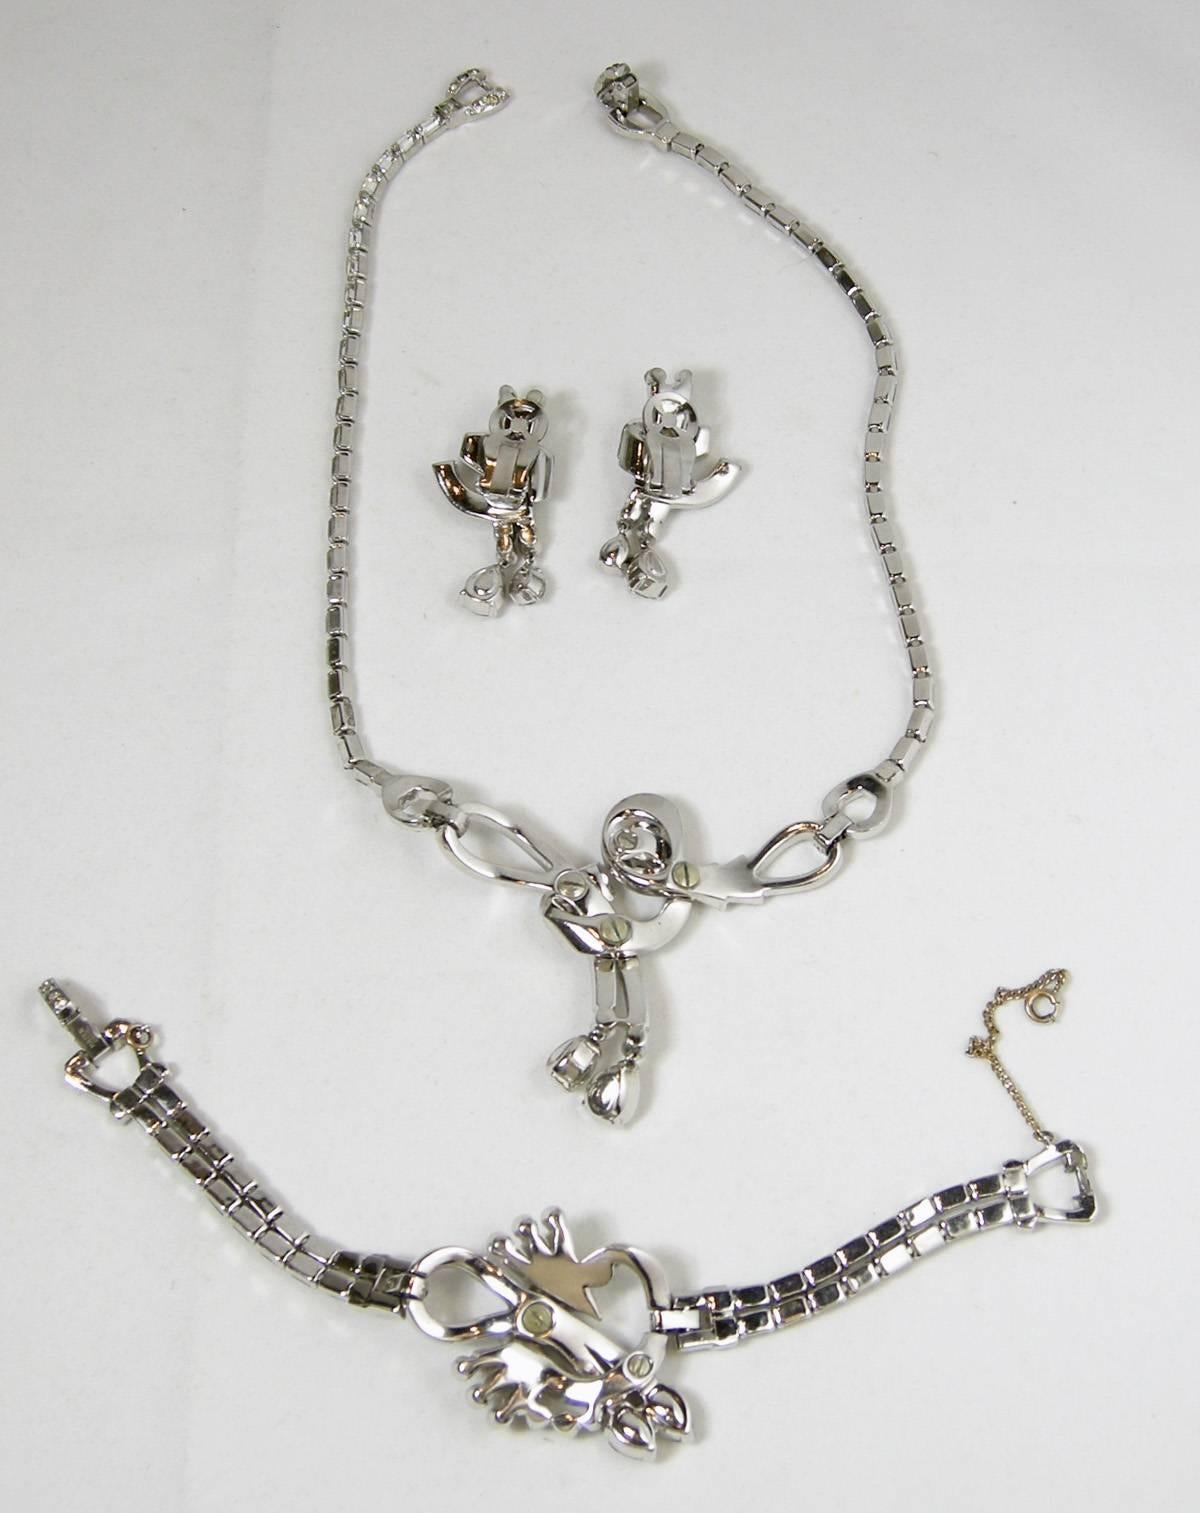 This is a very rare parure set by Mazer Brothers from the 40s.  It features clear crystal in a silver-tone rhodium setting.  The  necklace measures 16” long with a fold-over clasp and a front drop of 2-1/8” long/top to bottom.  The bracelet measures